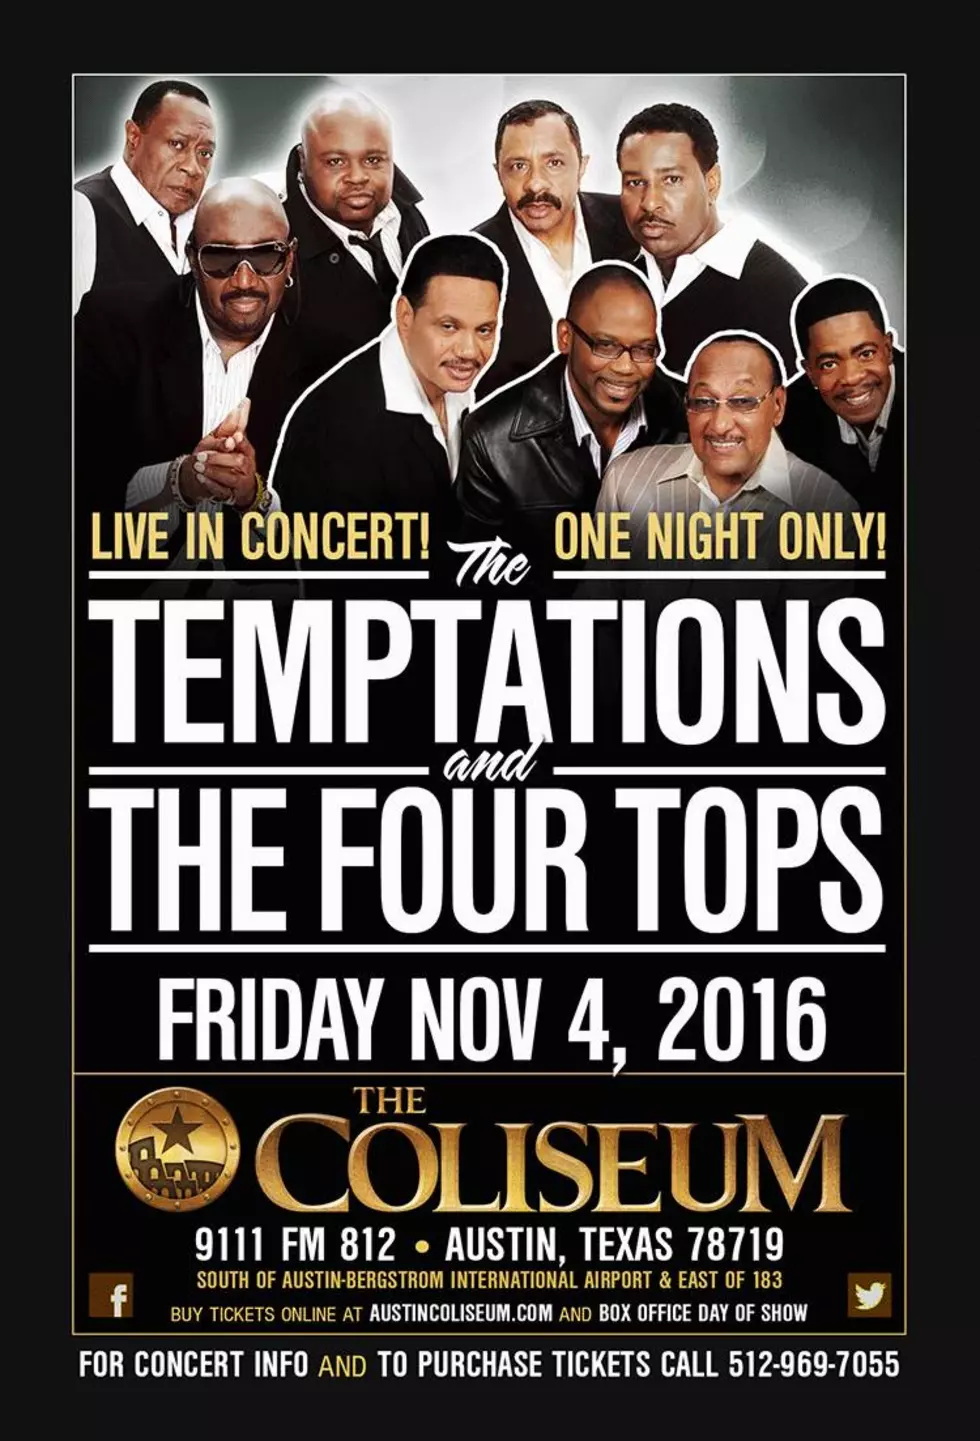 We’ve Got Your Tickets To See The Four Tops & The Temptations